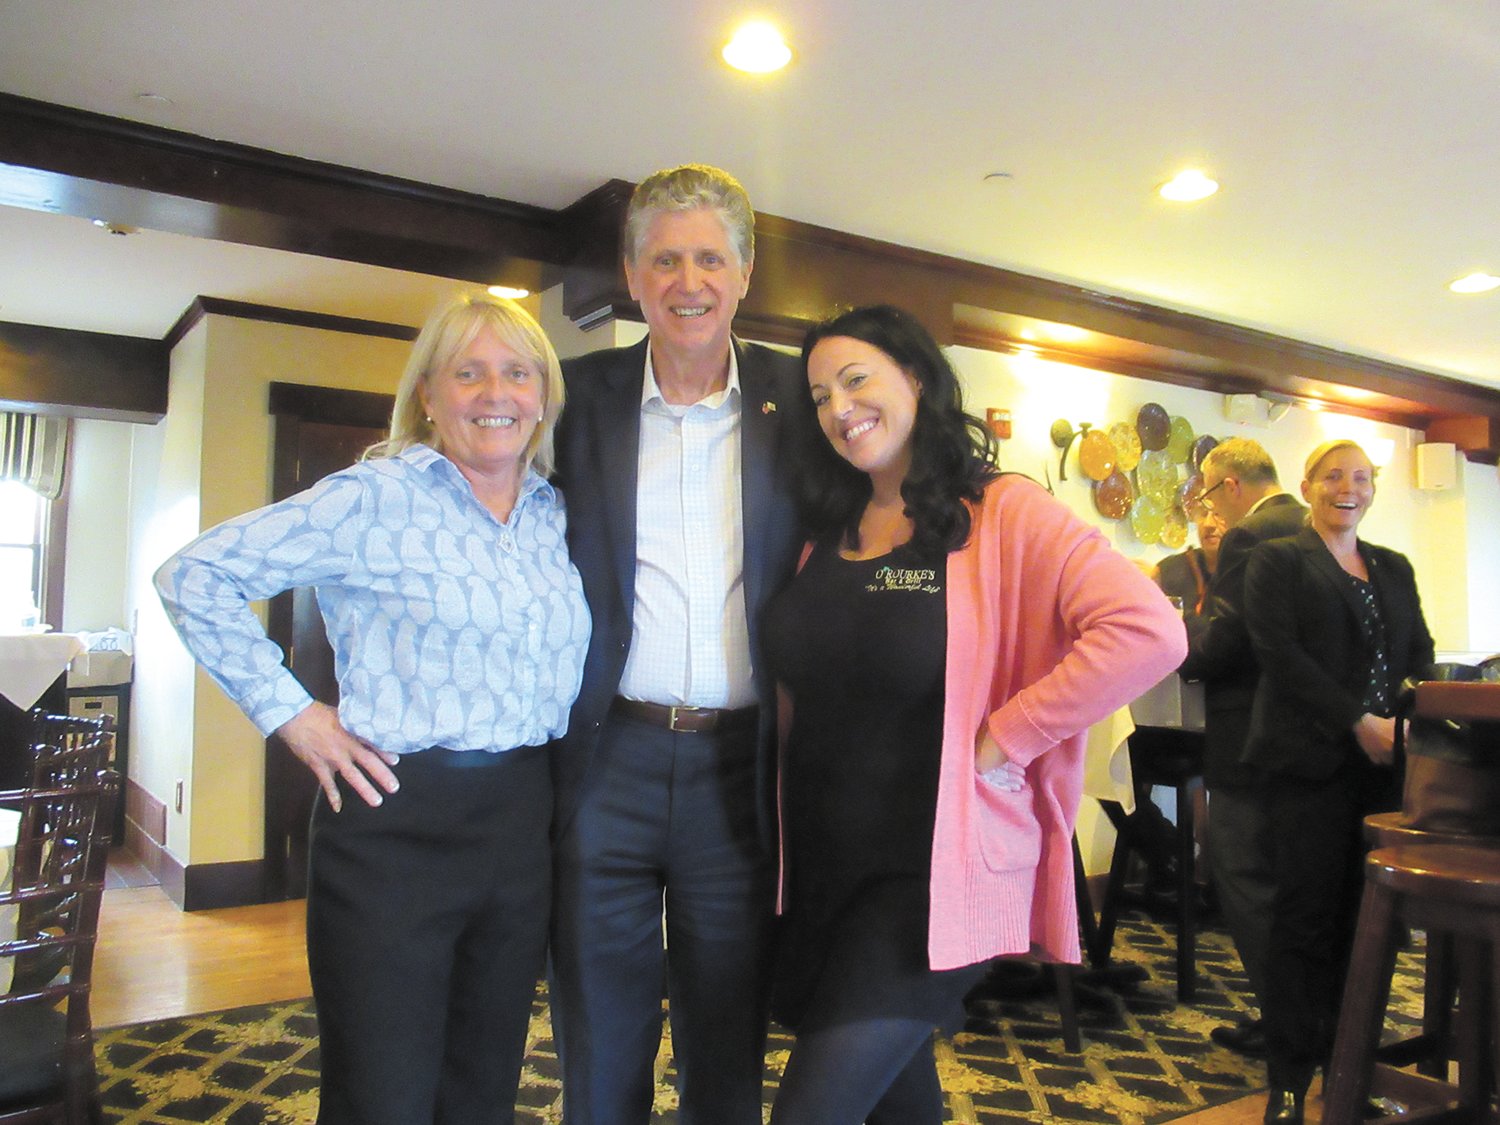 HAPPY HOSTS: Laurie O’Rourke (left), owner of O’Rourke’s Bar & Grill in Pawtucket Village and mixologist Amy Chaffee are all smiles as they welcome Gov. McKee.